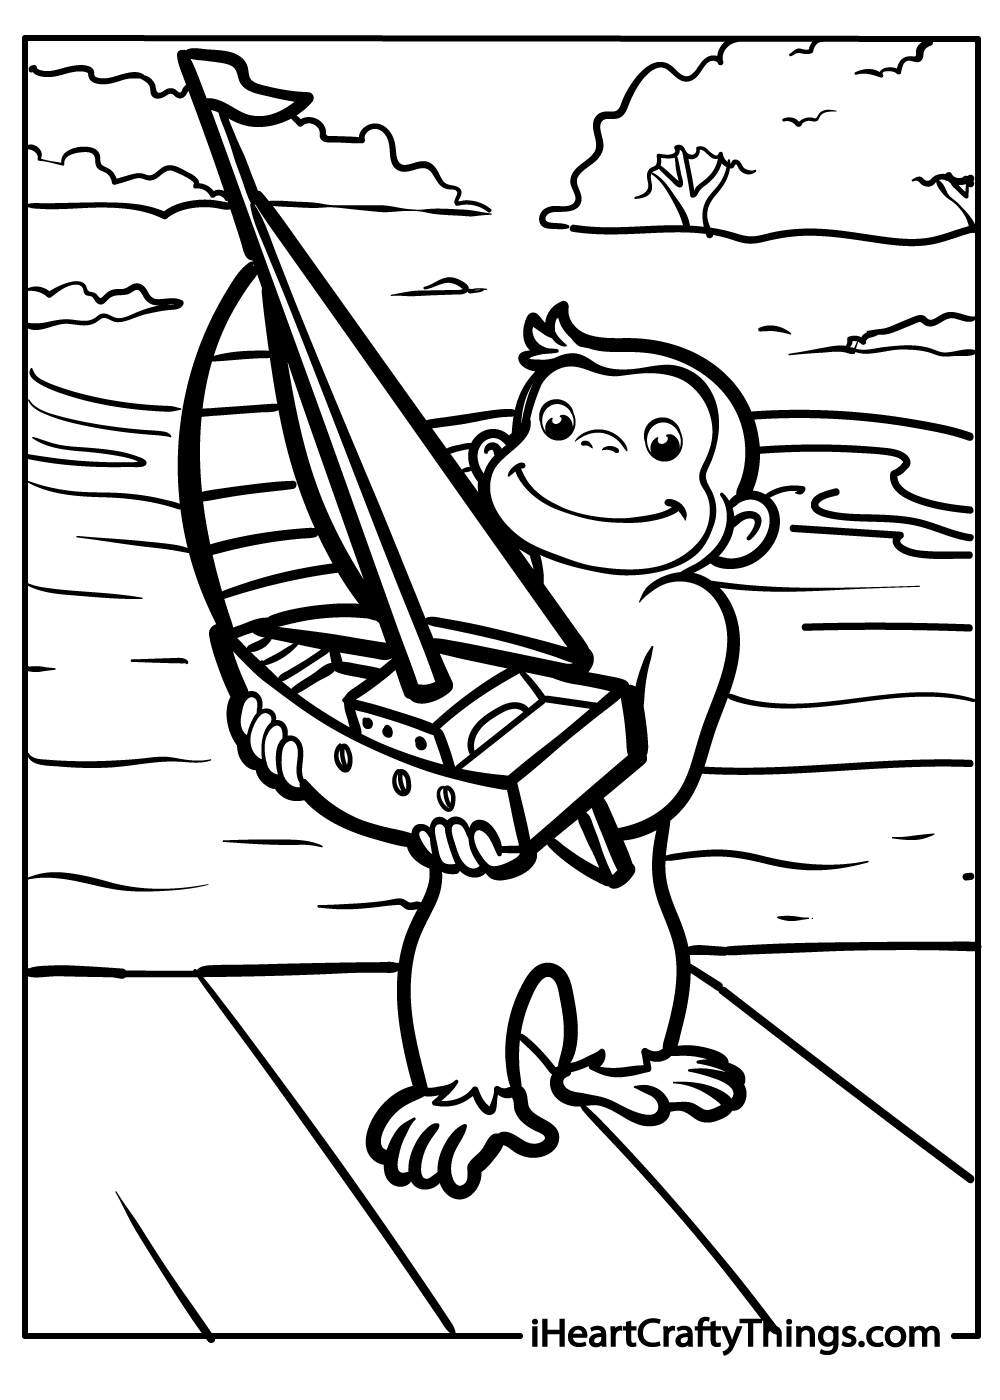 curious george coloring sheet free download